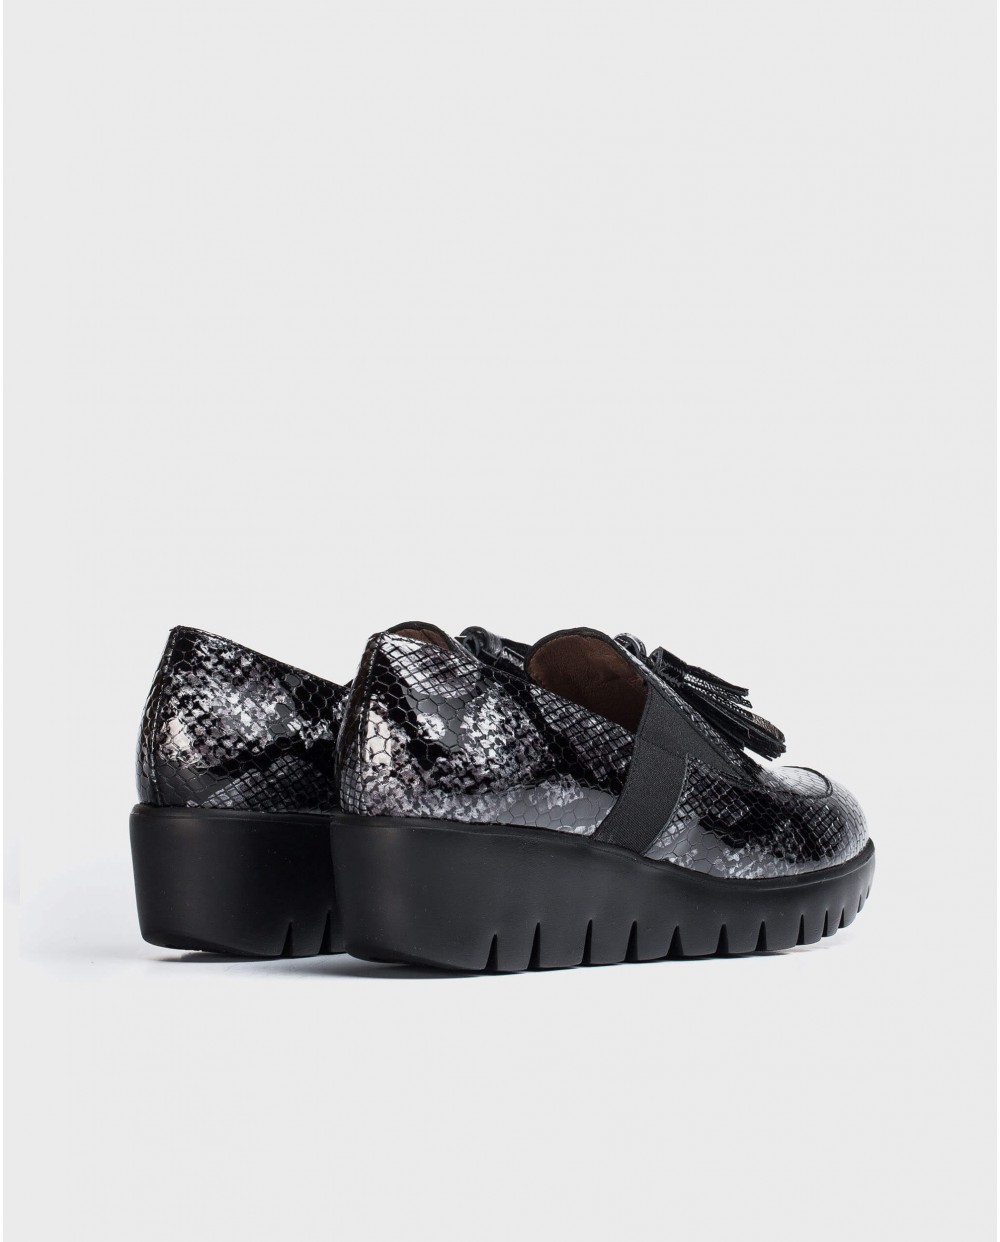 Wonders-Wedges-Lead Candy Moccasin